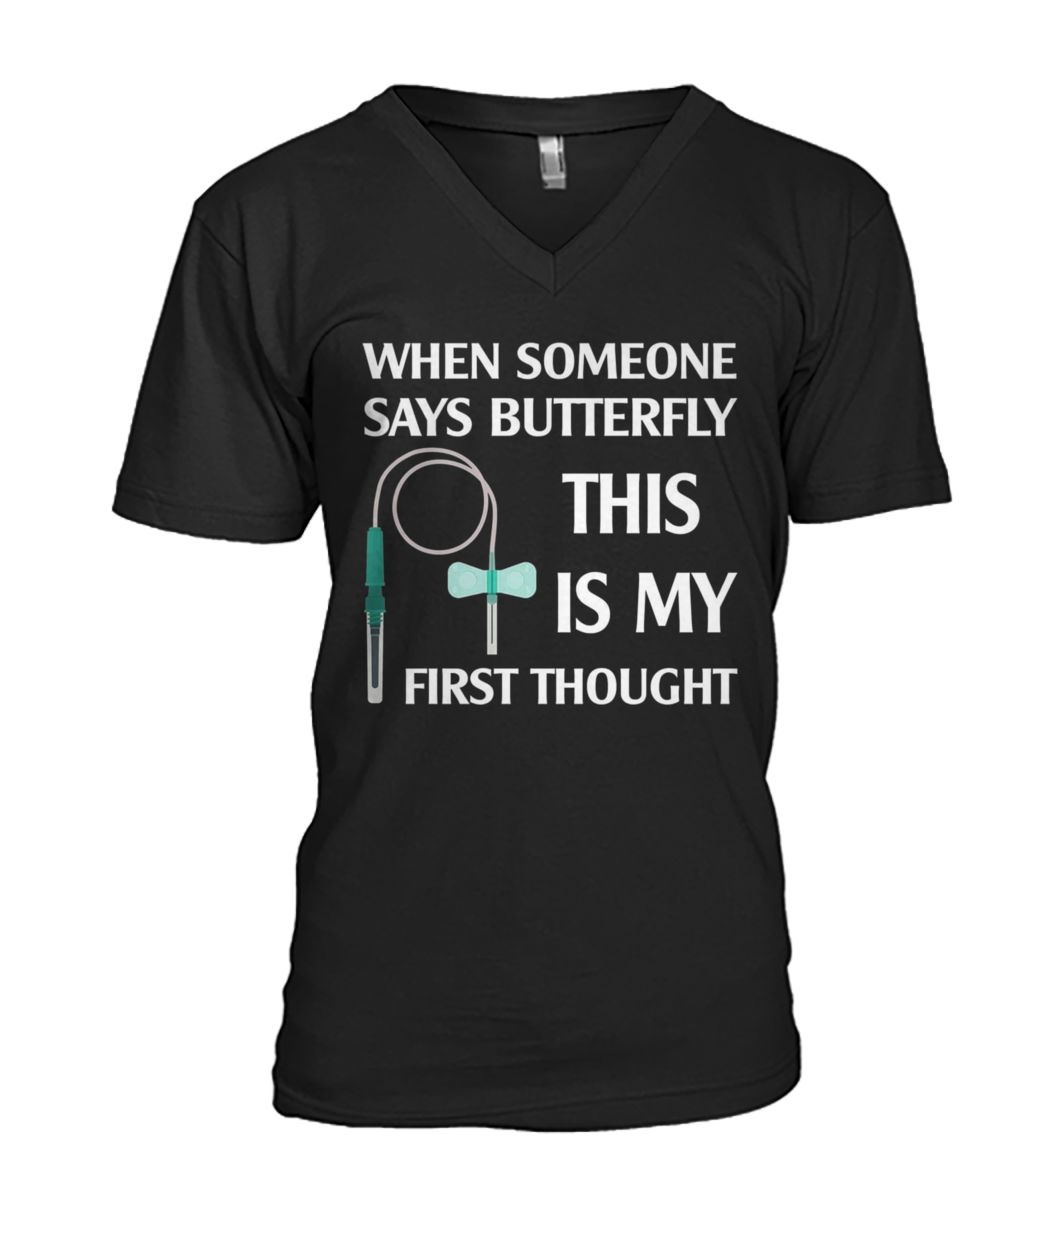 When someone says butterfly this is my first thought nurse mens v-neck